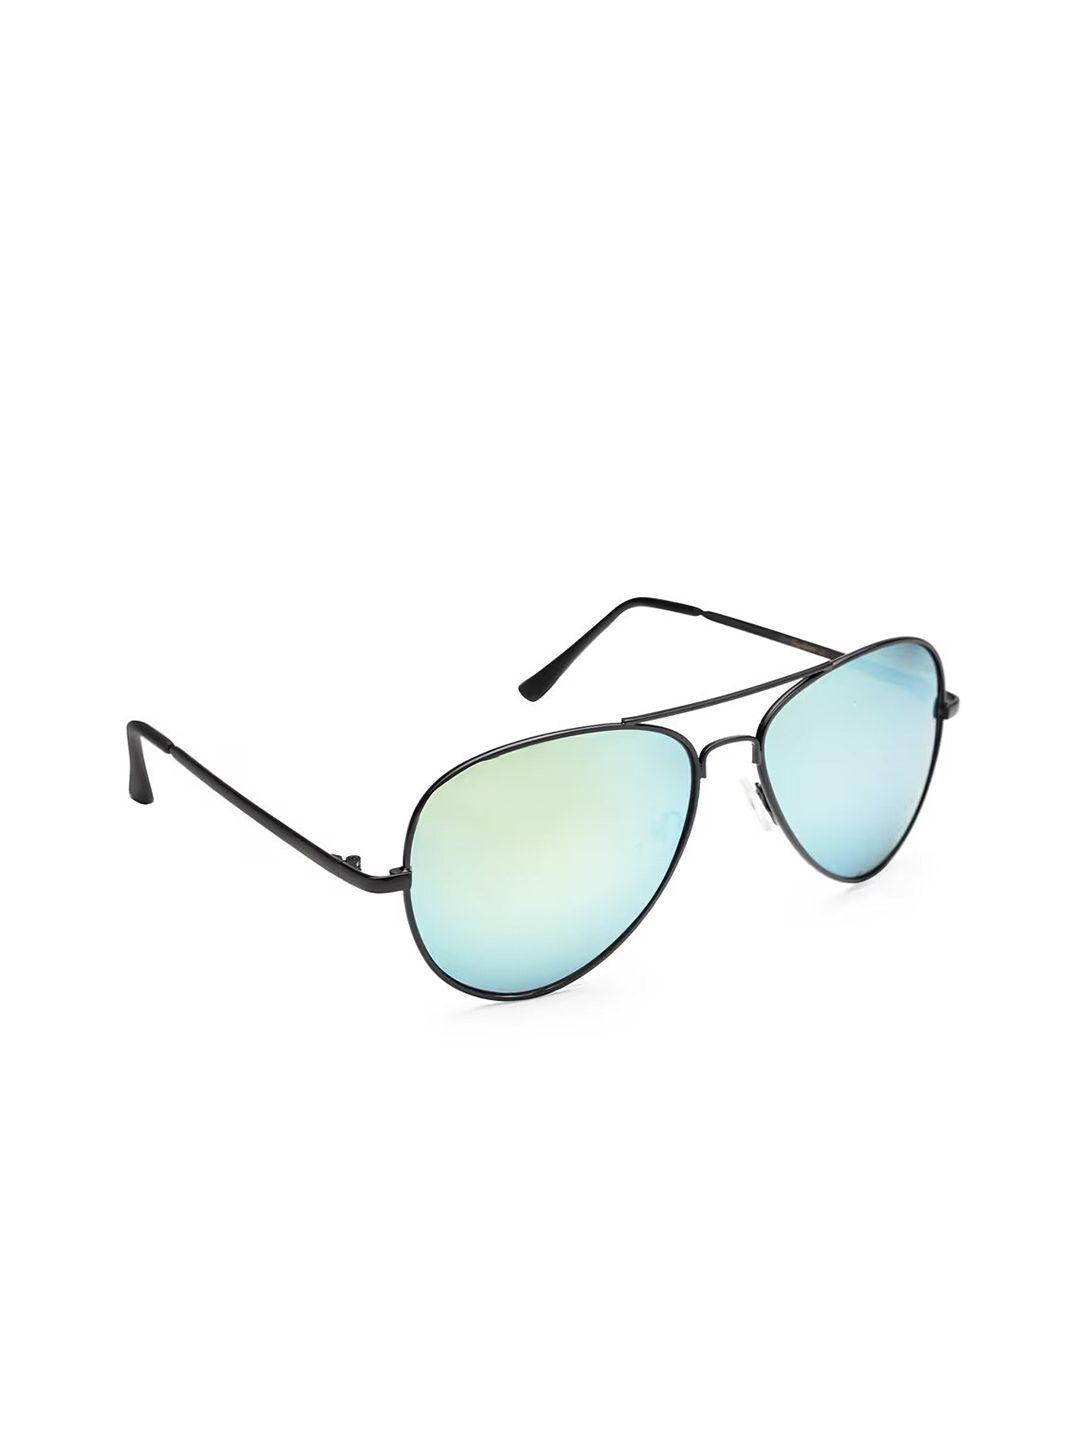 pepe jeans lens & aviator sunglasses with uv protected lens pj_5111c1_s3